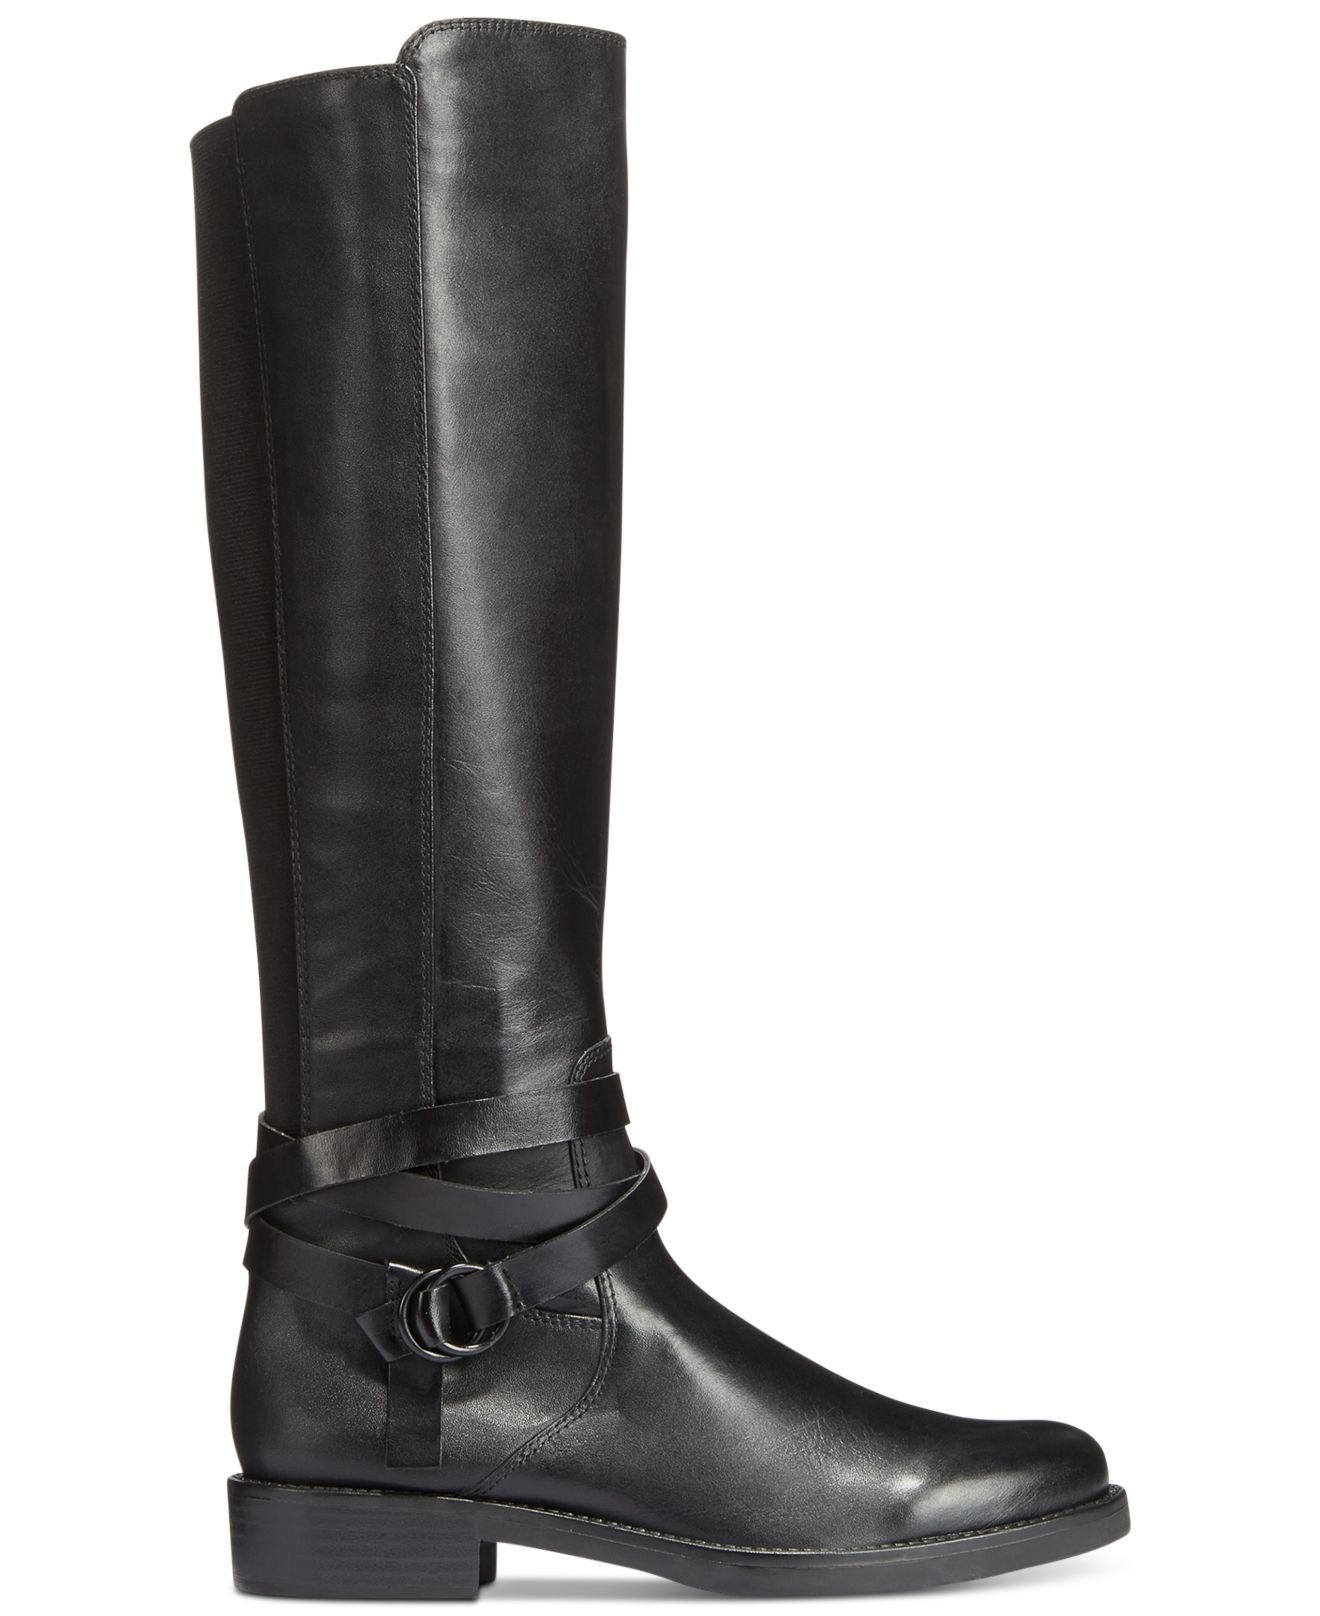 Kenneth Cole Reaction Kent Play Riding Boots in Black - Lyst